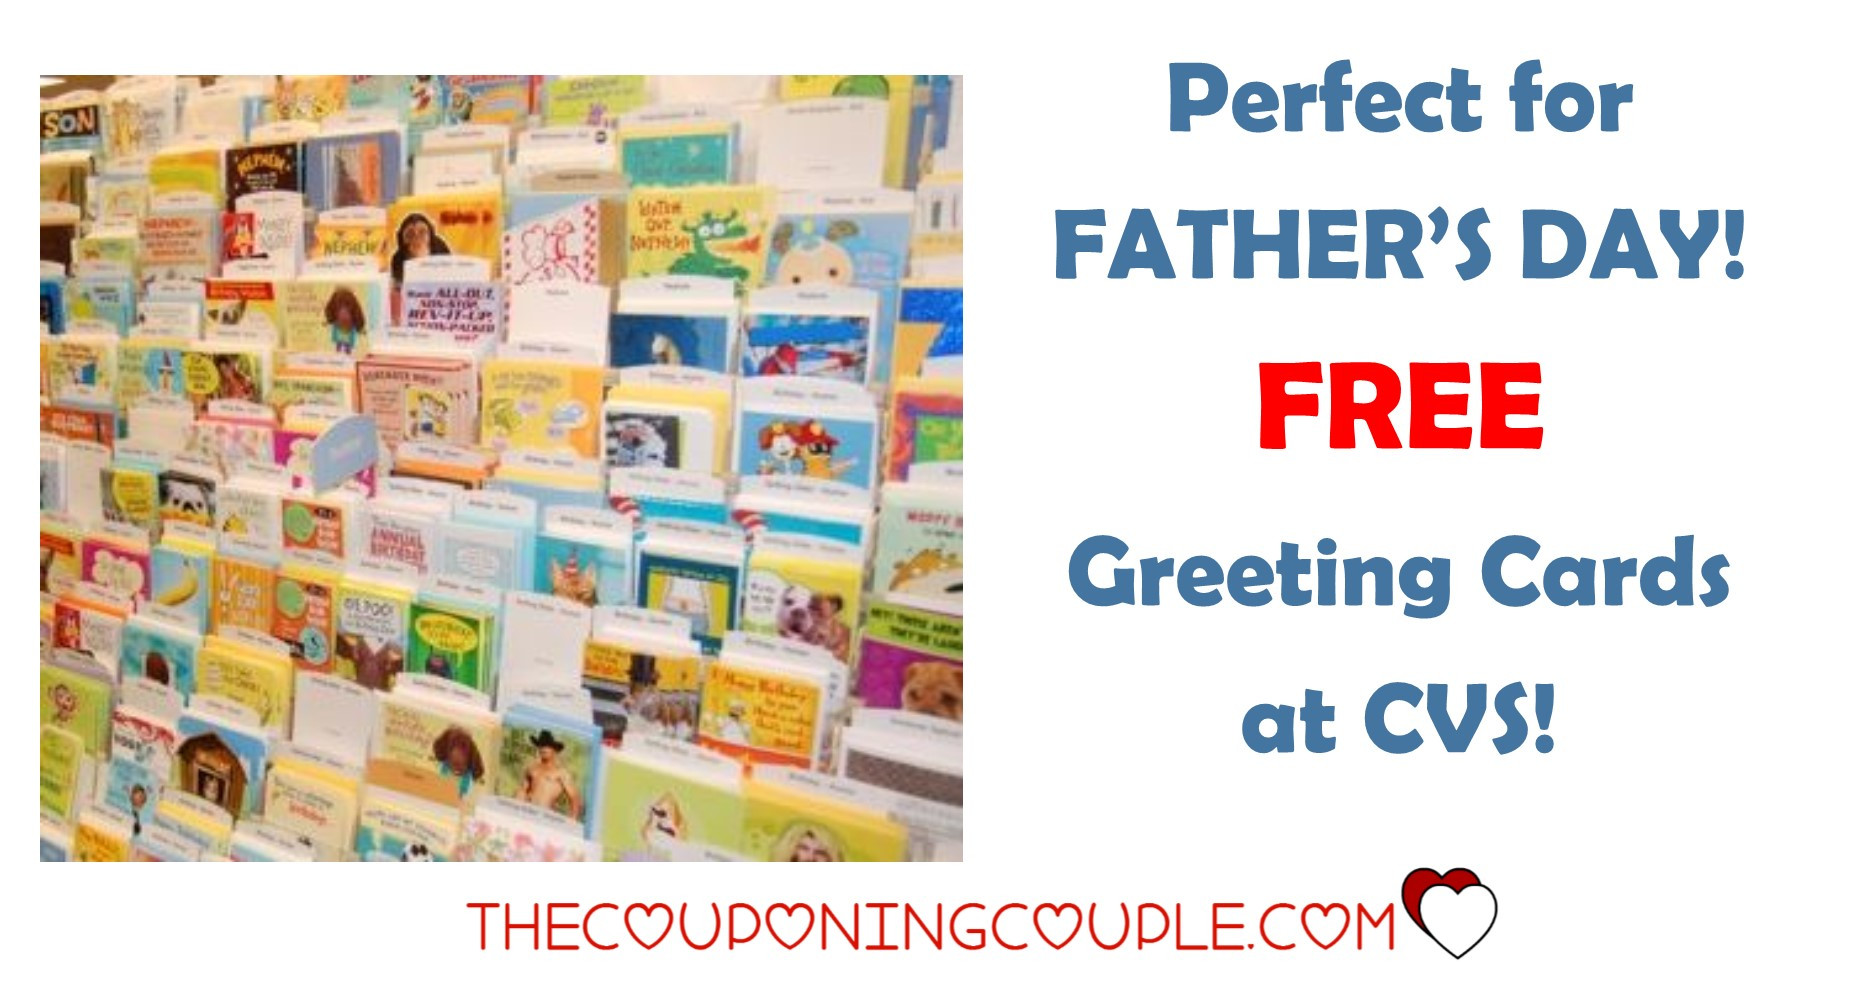 Cvs Birthday Cards
 FREE Greeting Cards at CVS Great for Father s Day